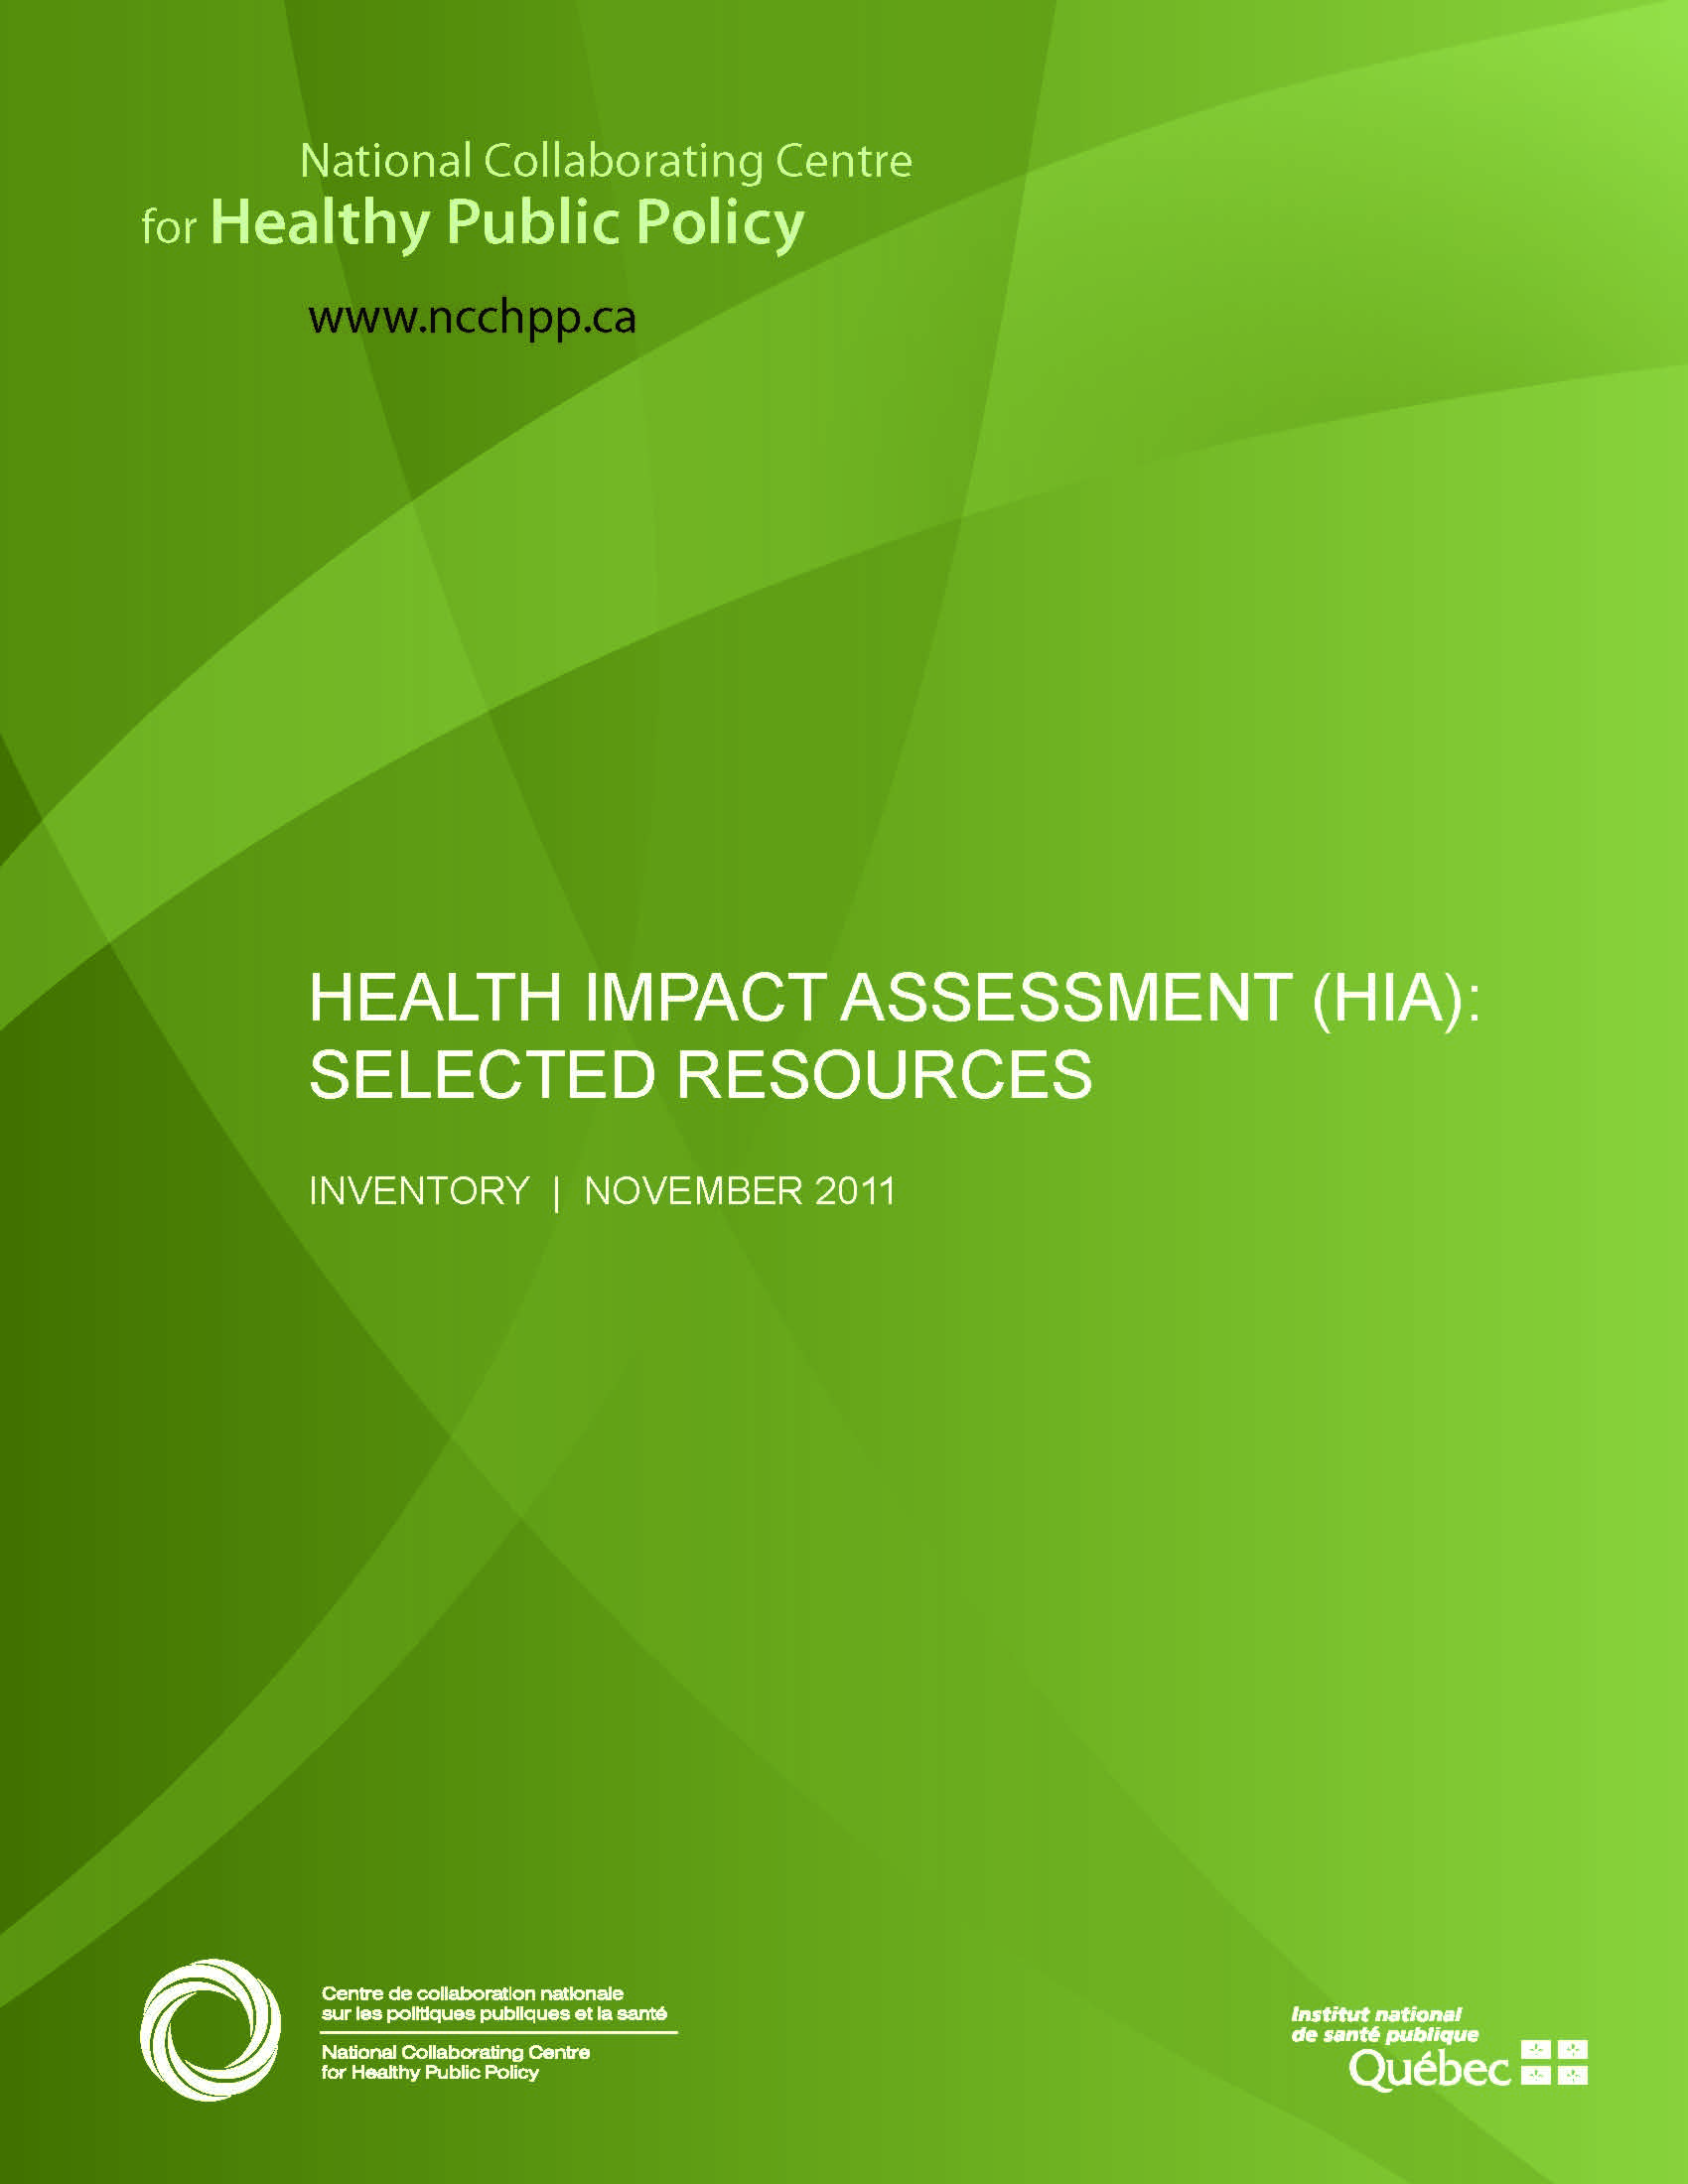 Health Impact Assessment: Inventory of Resources